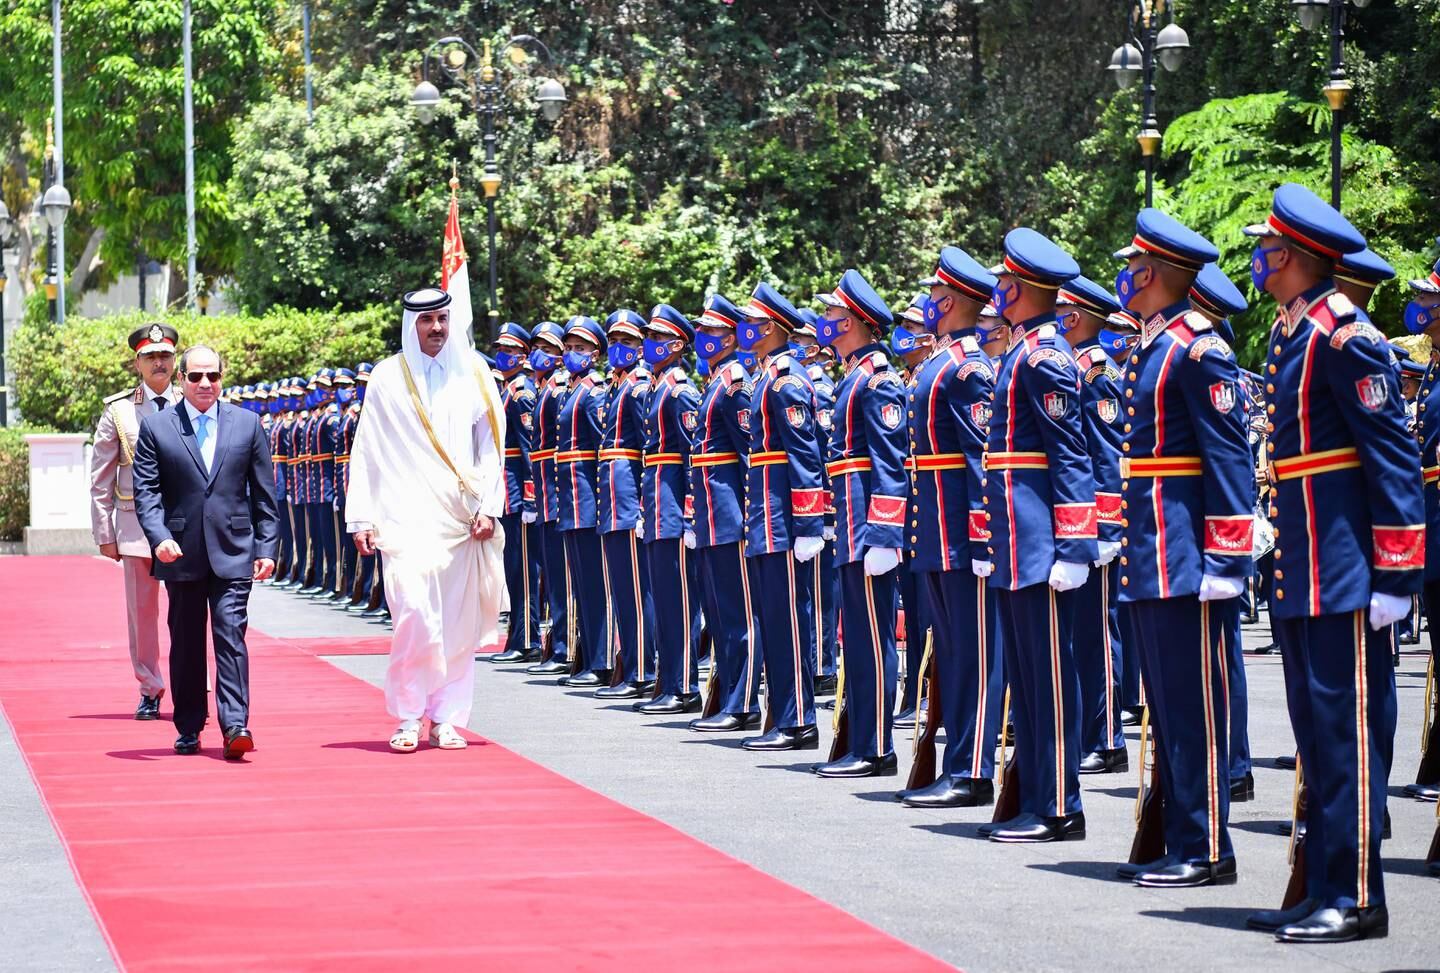 Egyptian President Abdel Fattah El Sisi accompanies Emir of Qatar Sheikh Tamim bin Hamad Al Thani past a guard of honour during the official welcoming ceremony at the Presidential Palace in Cairo, Egypt. EPA